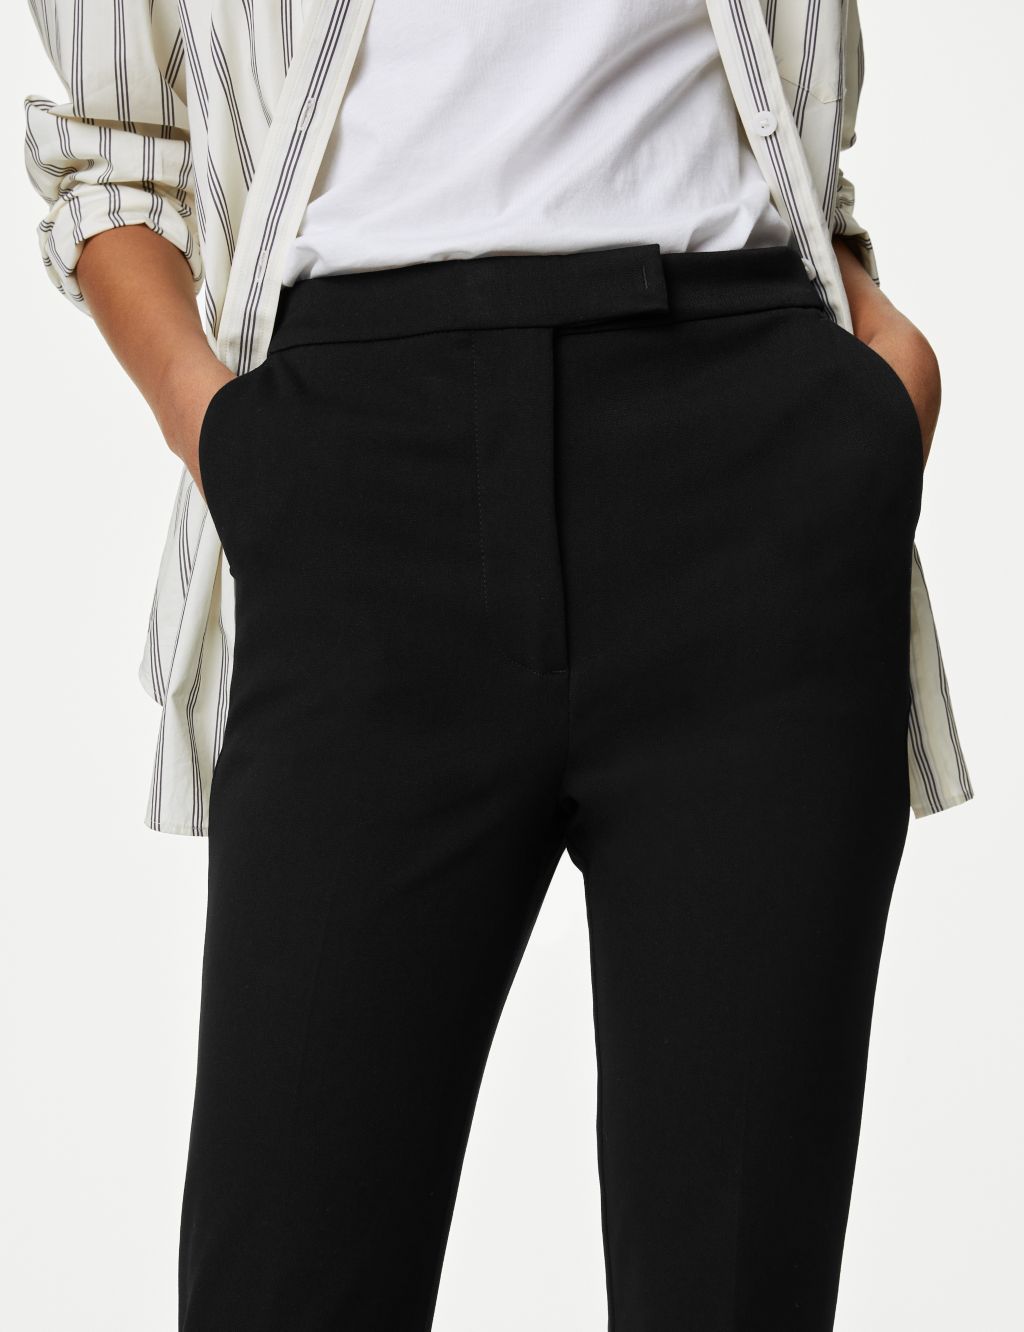 Slim Fit Ankle Grazer Trousers image 4